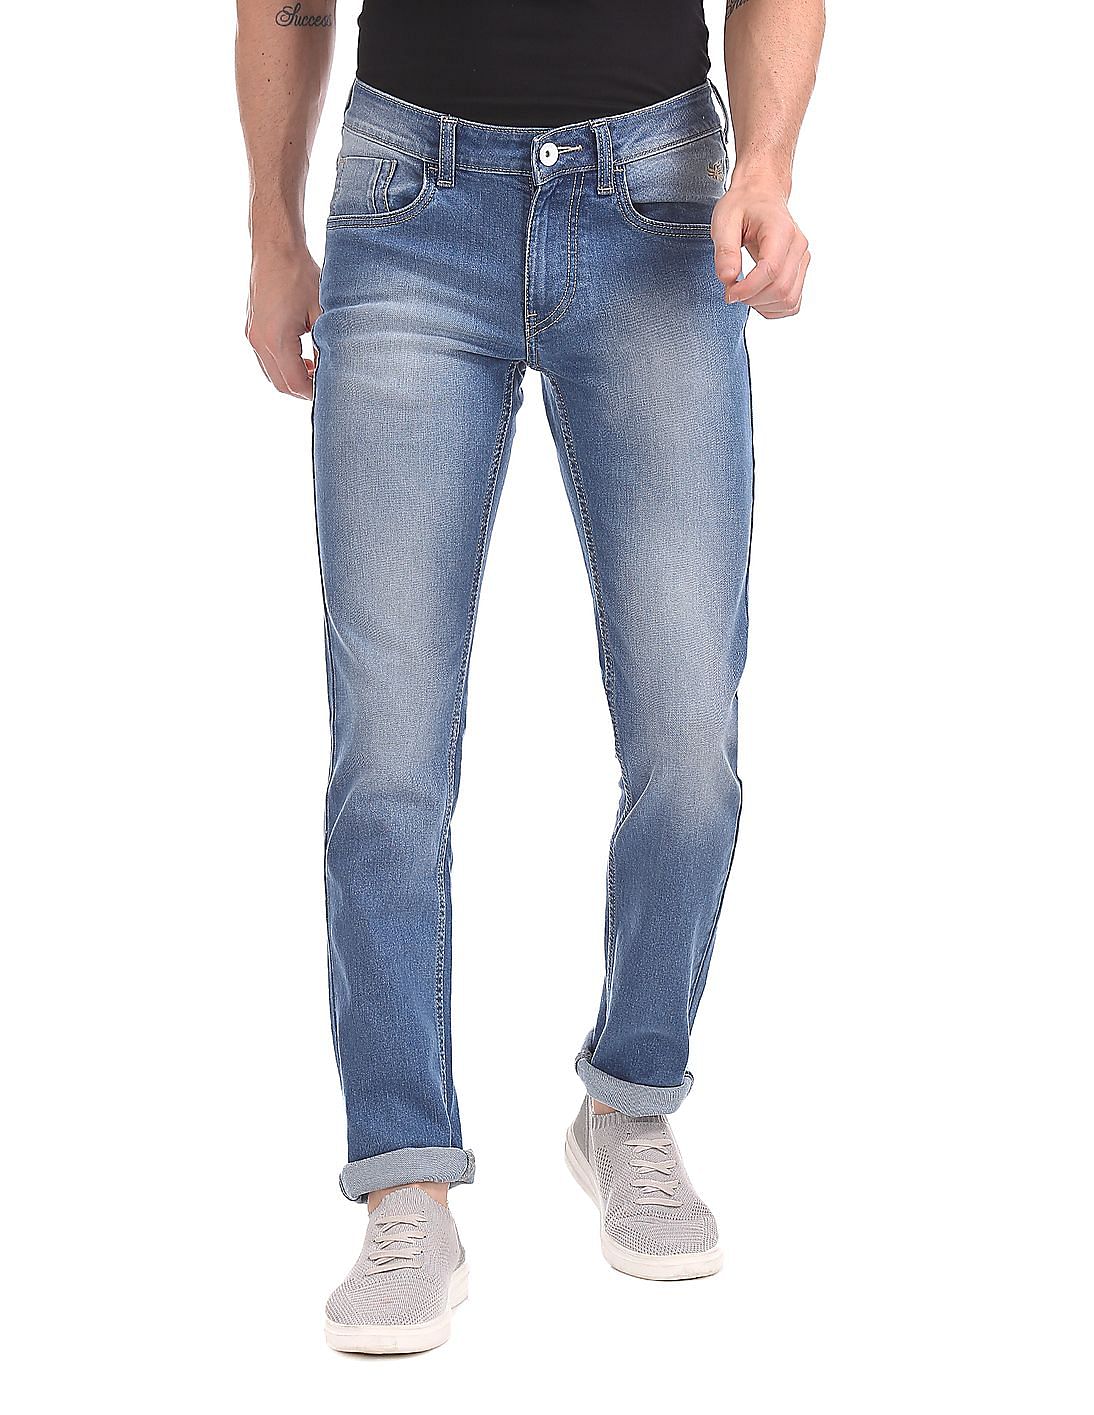 Buy Men Low Rise Jackson Skinny Fit Jeans online at NNNOW.com